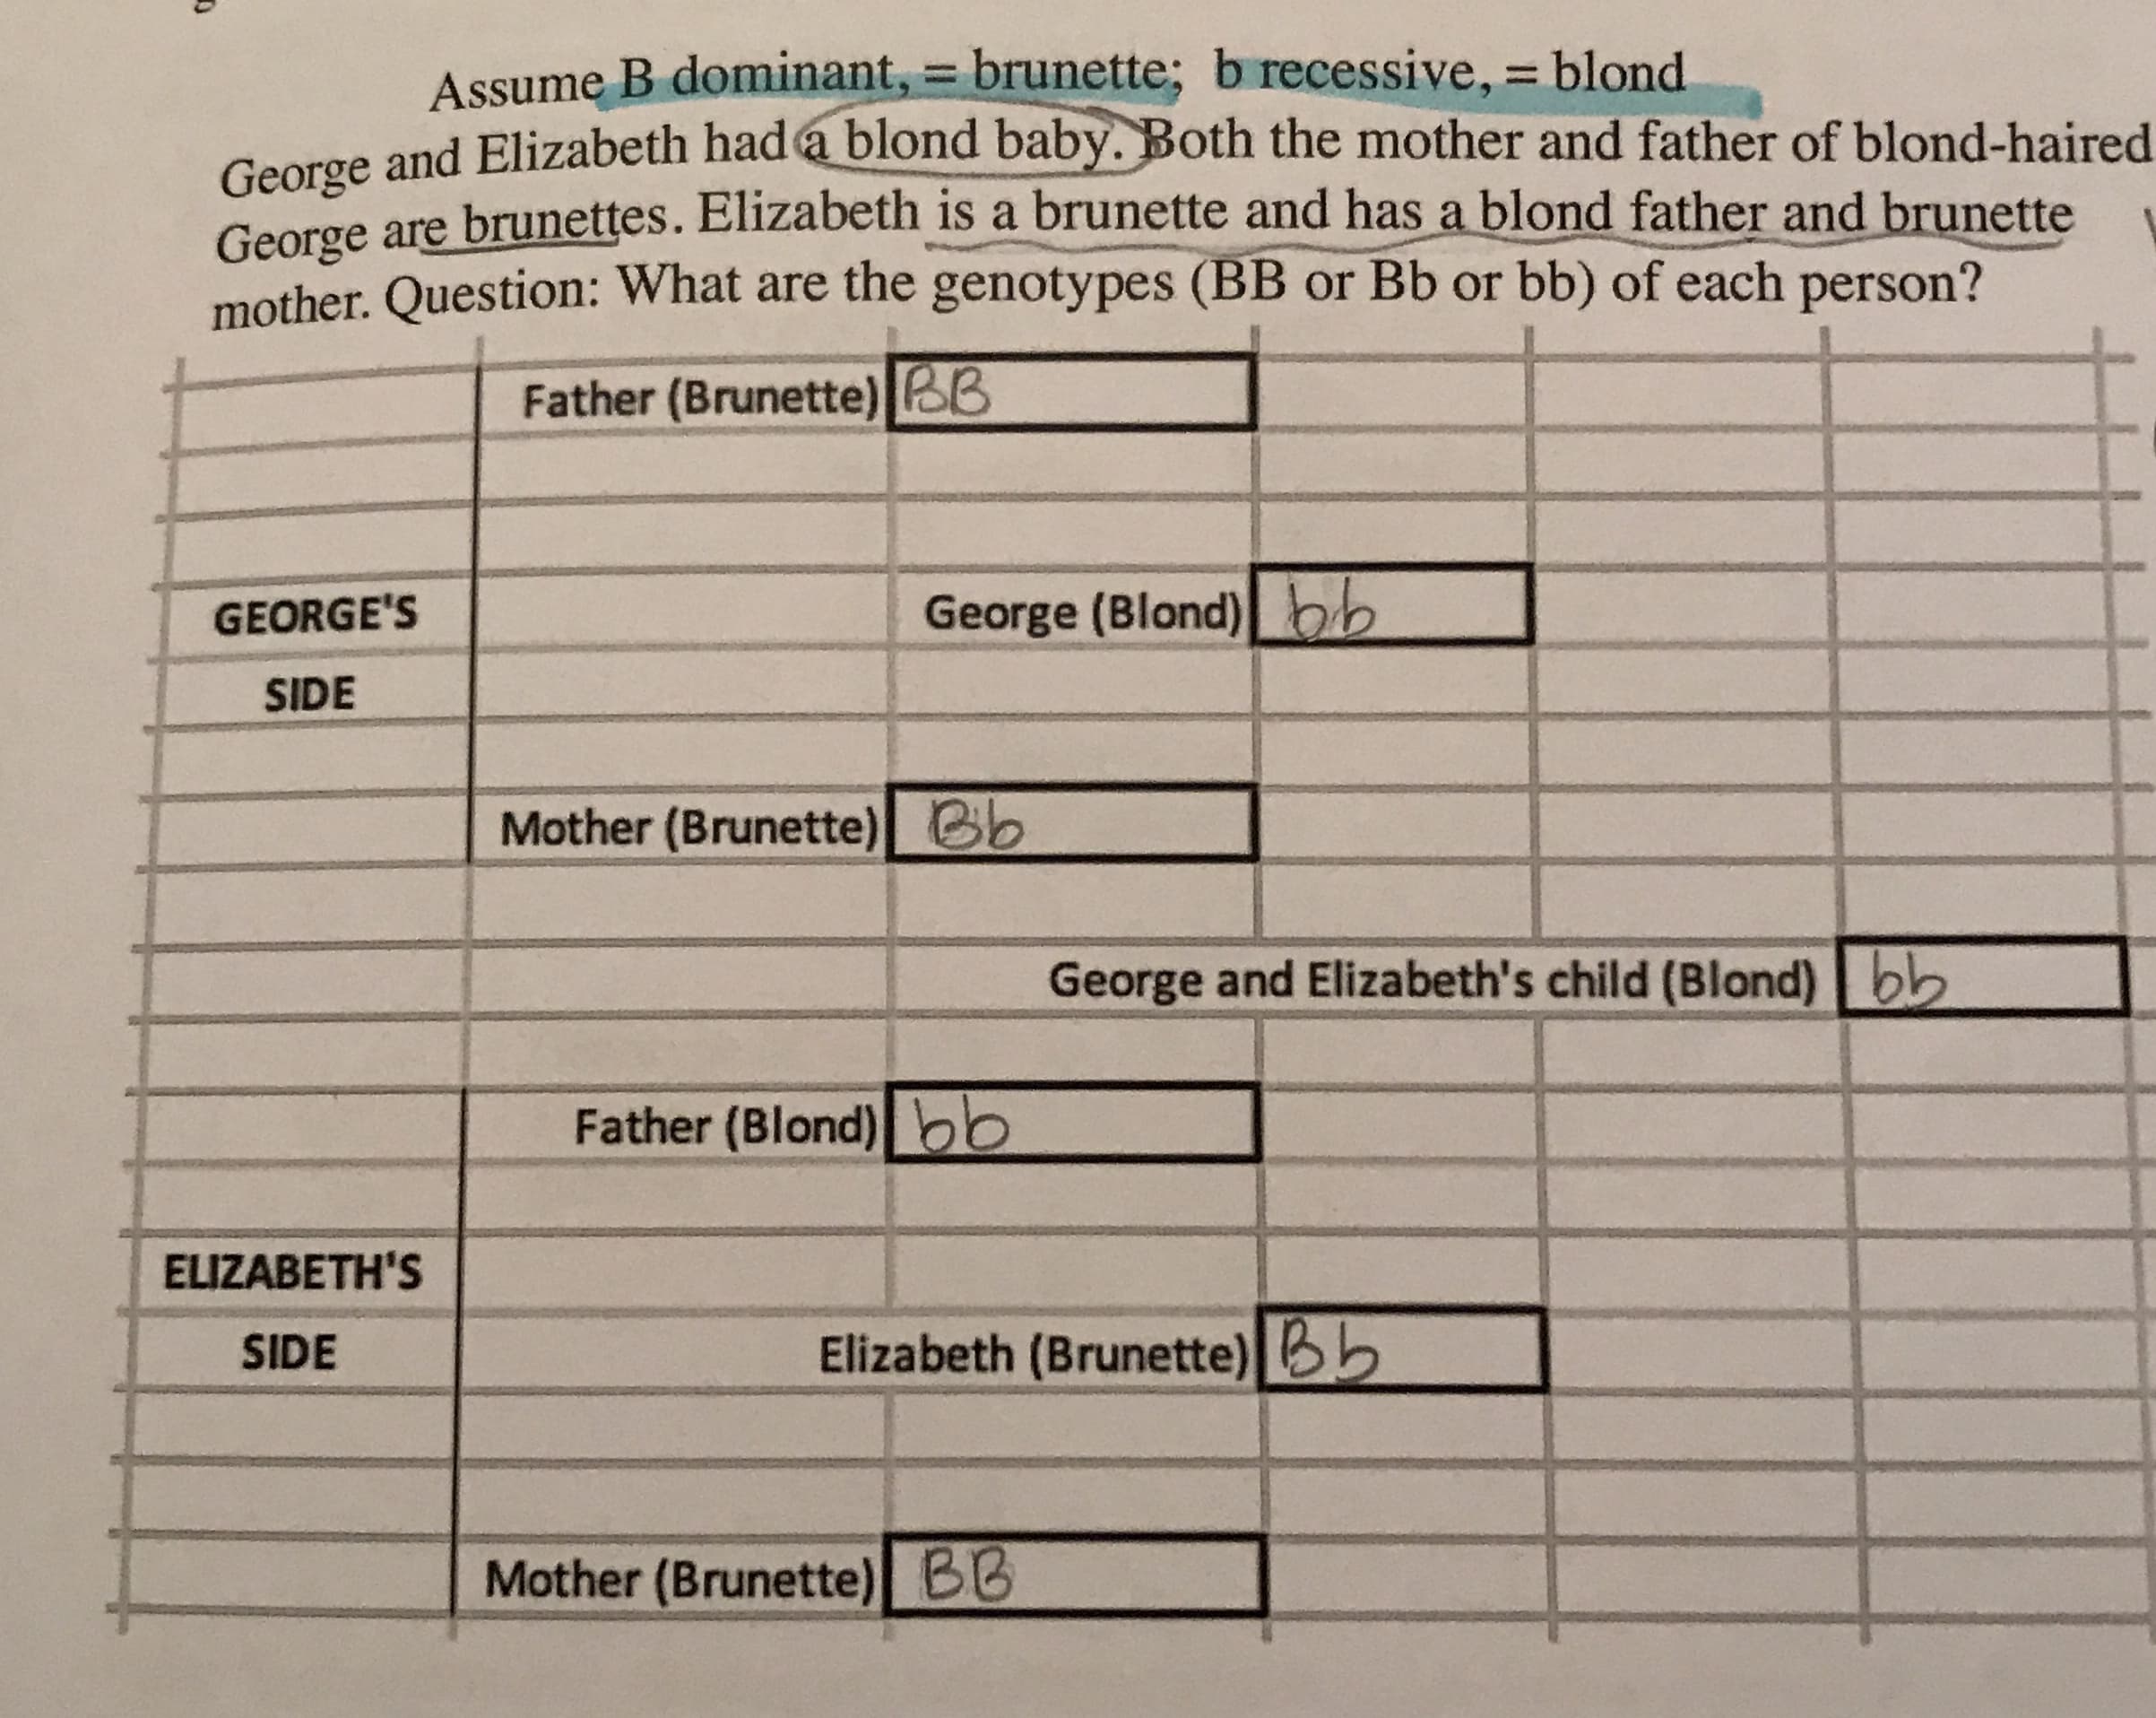 Assume B dominant, = brunette; b recessive, blond
George and Elizabeth had a blond baby. Both the mother and father of blond-haired
George are brunettes. Elizabeth is a brunette and has a blond father and brunette
mother. Question: What are the genotypes (BB or Bb or bb) of each
person?
Father (Brunette) BB
George (Blond)bb
GEORGE'S
SIDE
Mother (Brunette)Bb
George and Elizabeth's child (Blond)bb
Father (Blond)bb
ELIZABETH'S
Elizabeth (Brunette)b
SIDE
Ве
Mother (Brunette) BB
